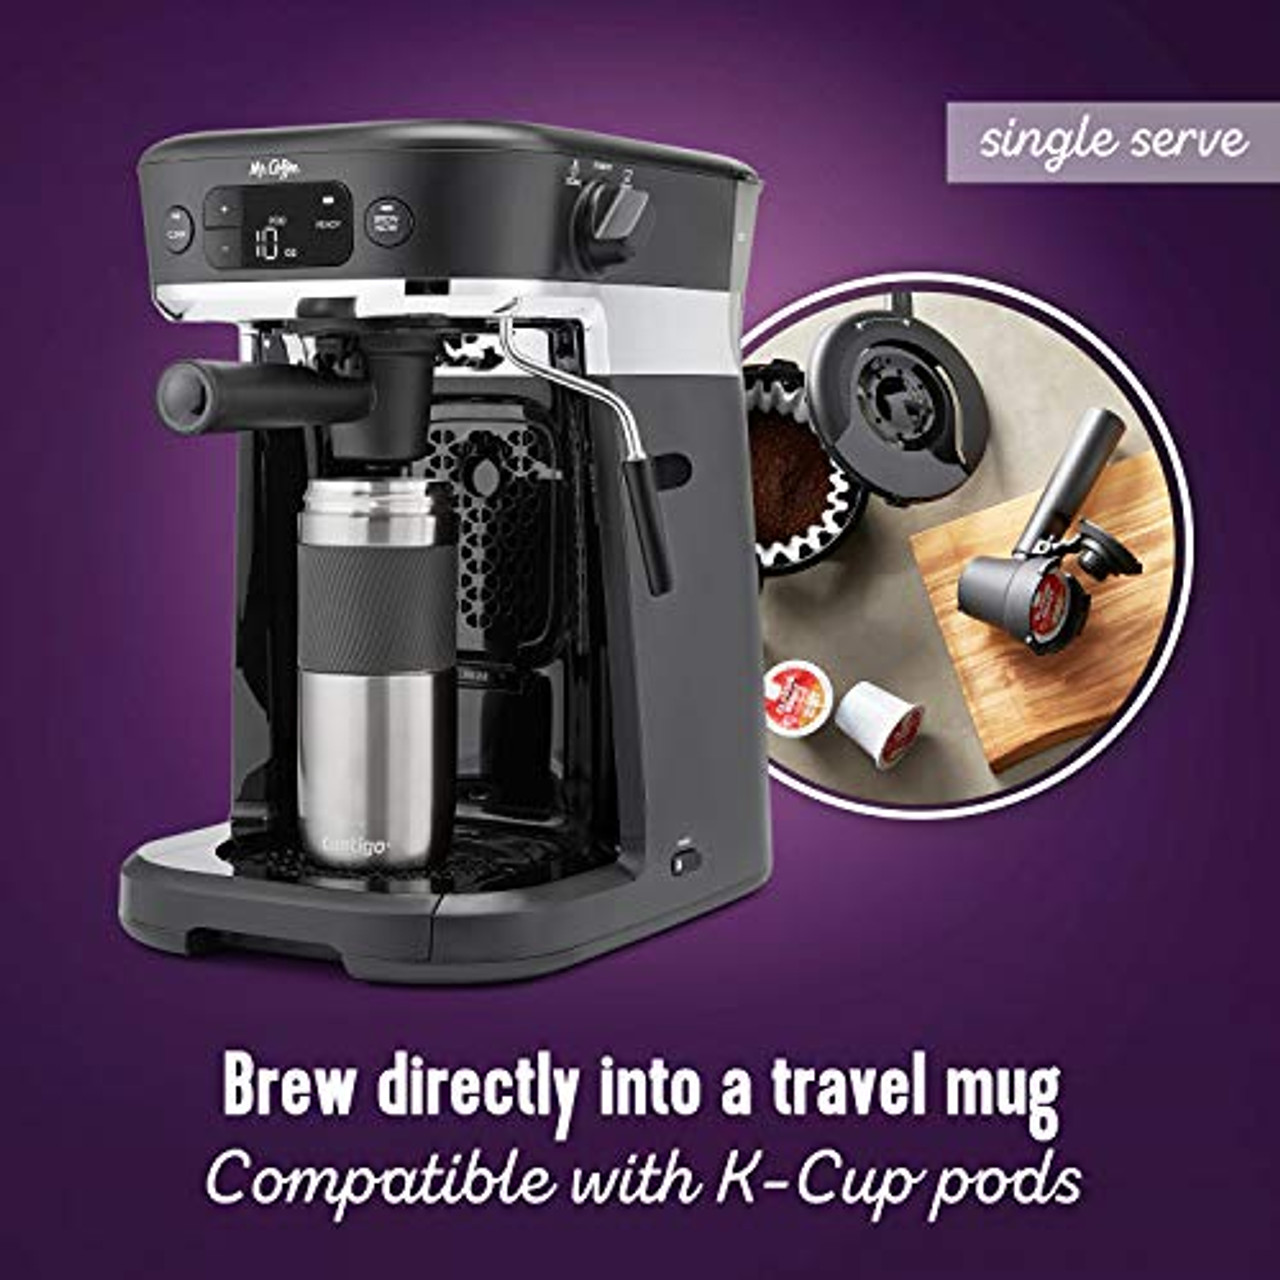 Mr. Coffee Single Cup Coffeemaker With Built-in Grinder With Travel Mug, Coffee, Tea & Espresso, Furniture & Appliances